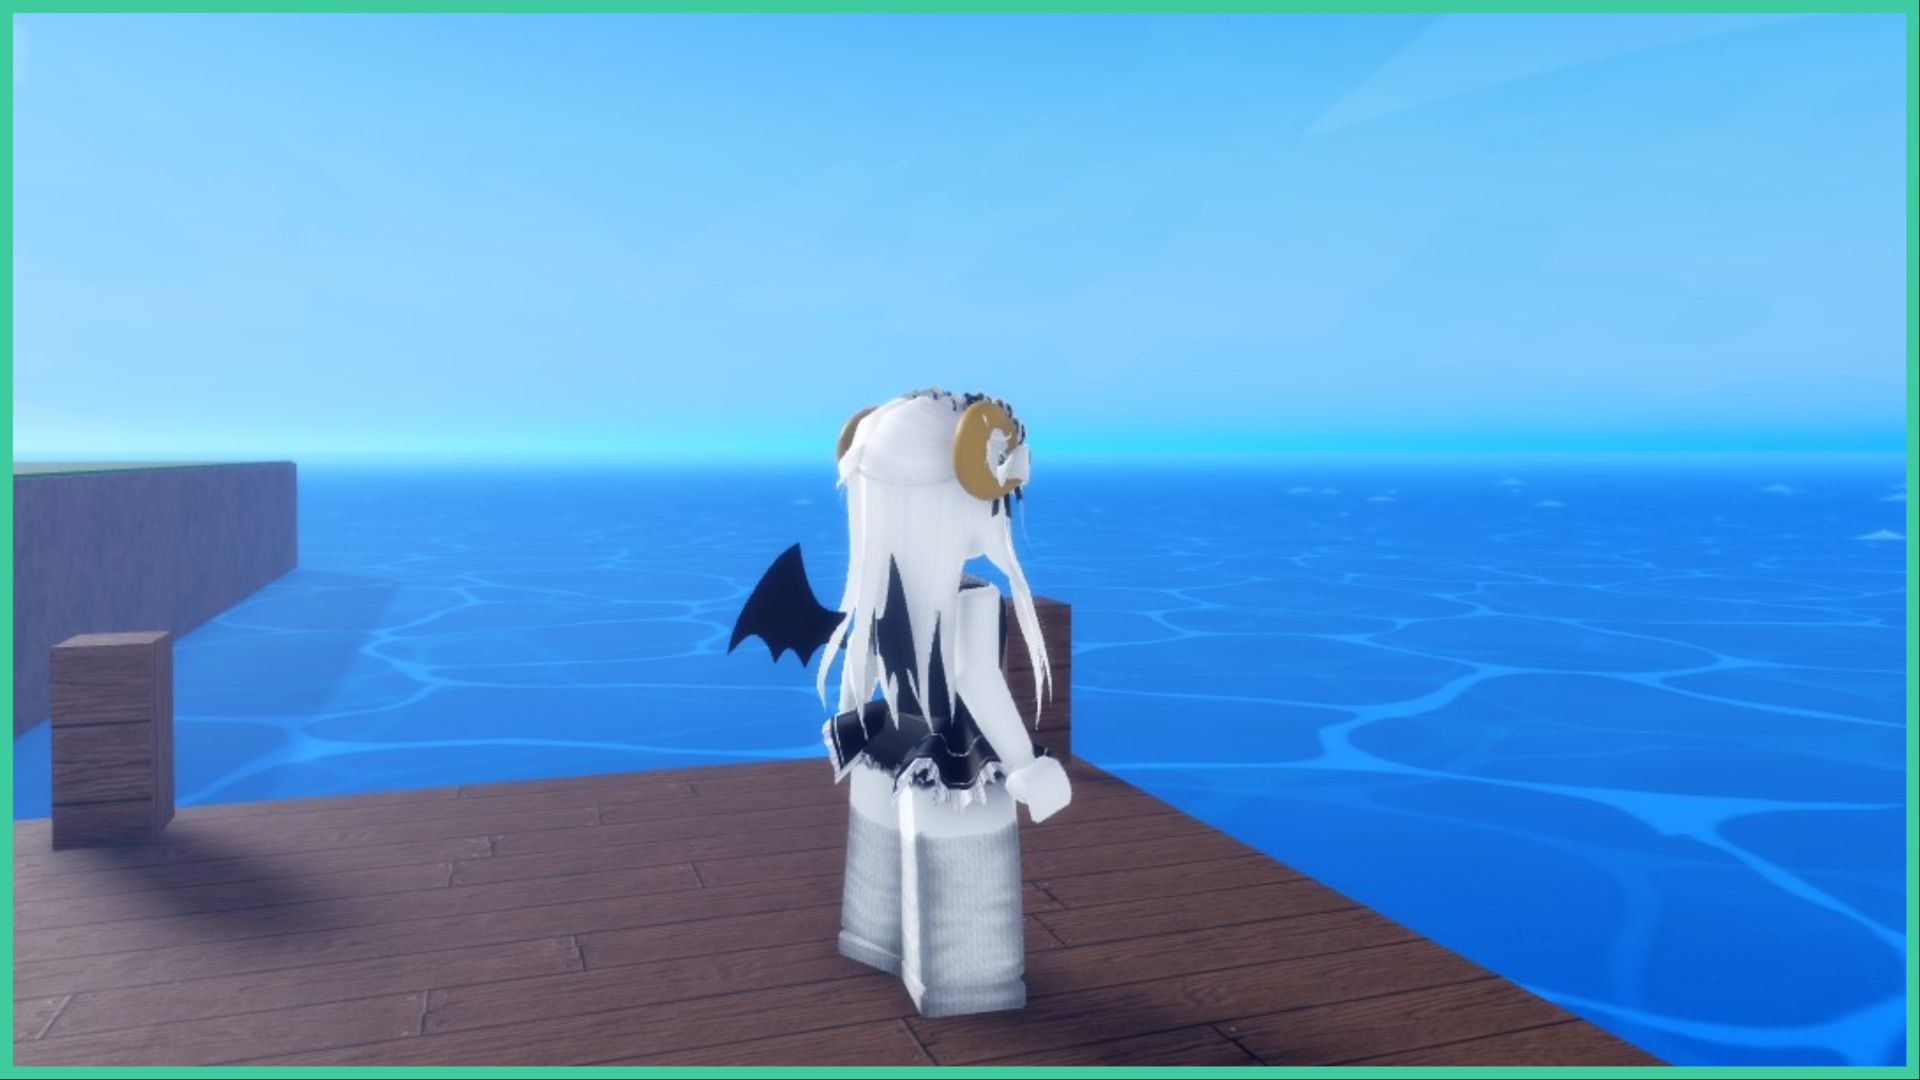 feature image for our demon piece races guide, the image is of a roblox player wearing bat wings and ram horns standing on a wooden deck overlooking the ocean